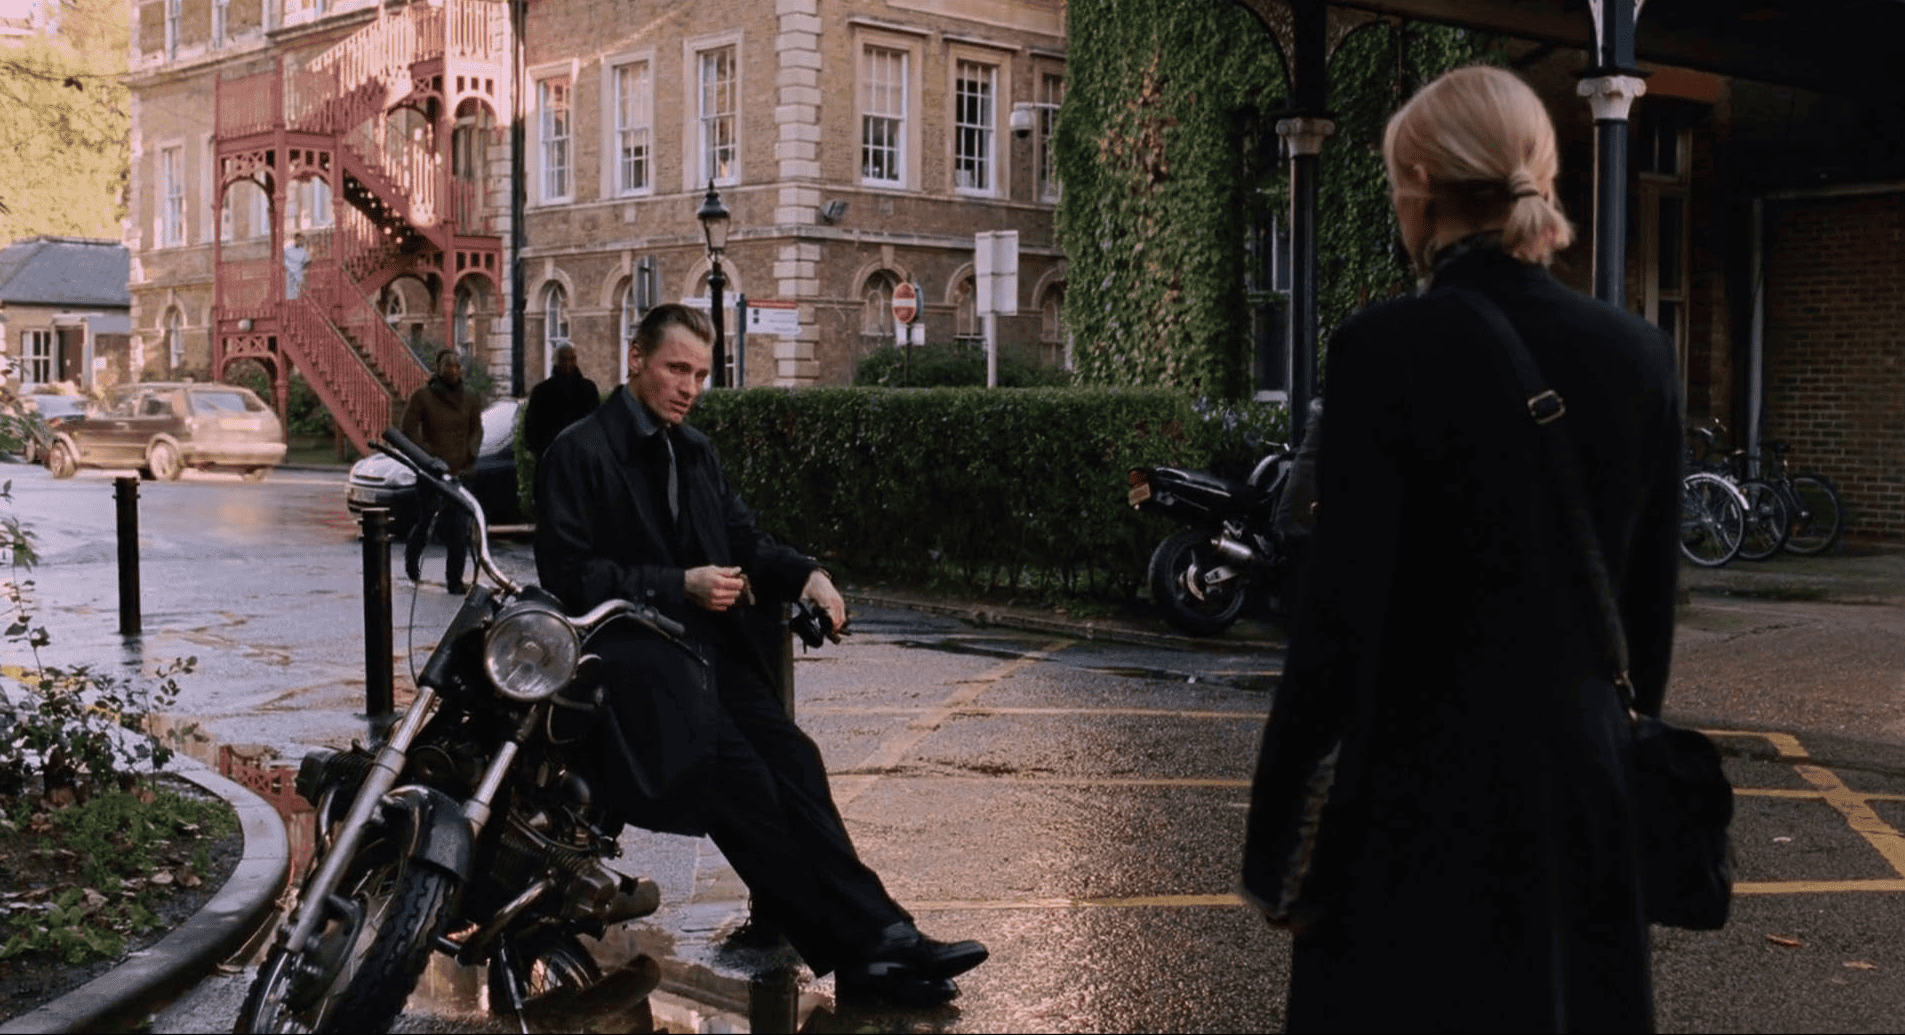 A woman approaches a man sitting on a motorcycle in this image from Focus Features.